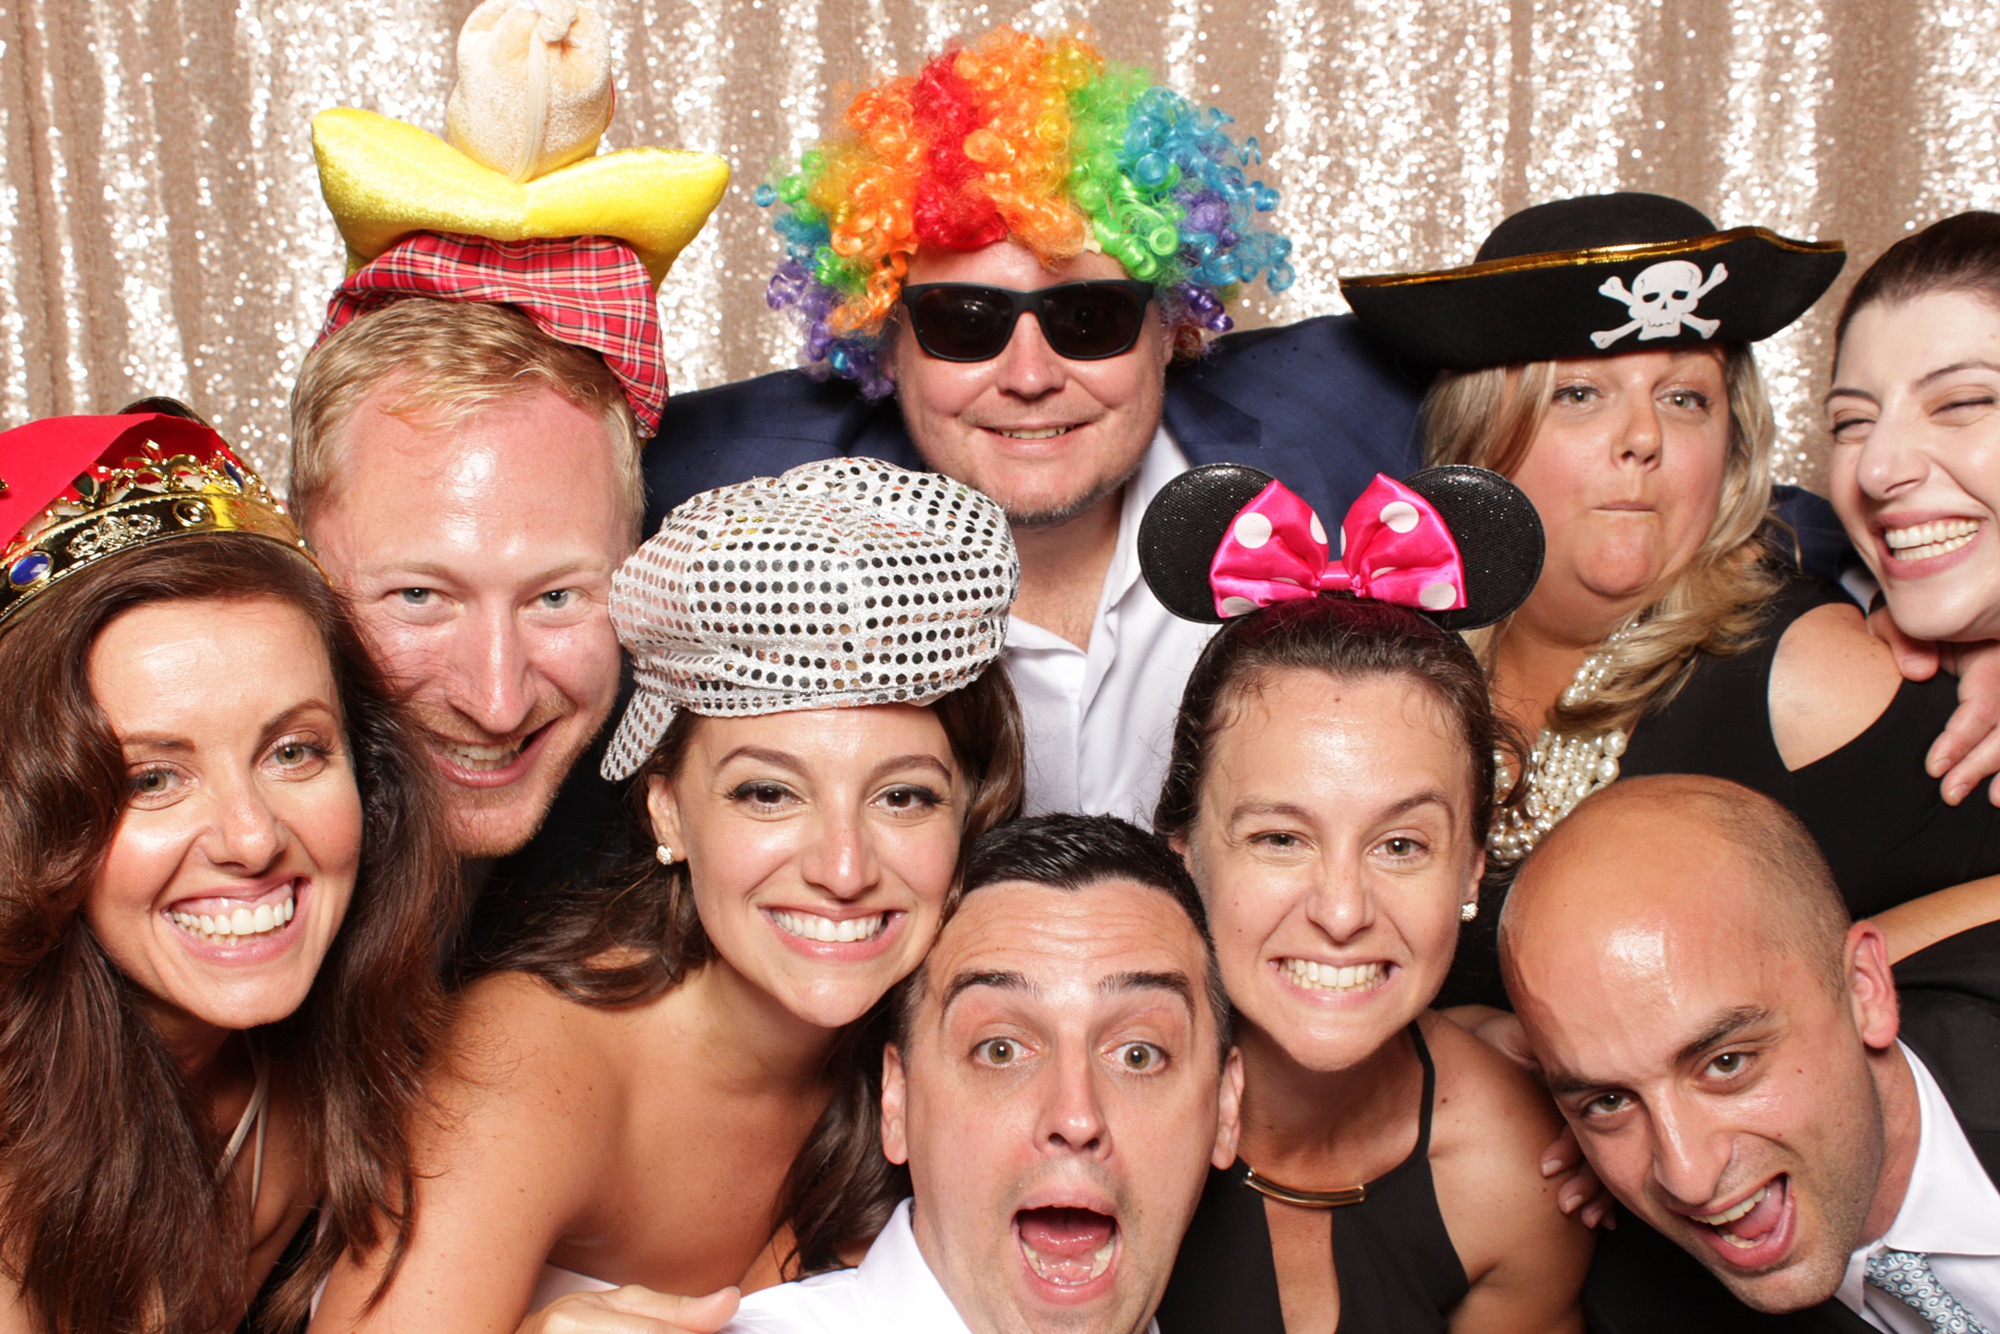 photo booth fun in Sandy Hook during wedding reception